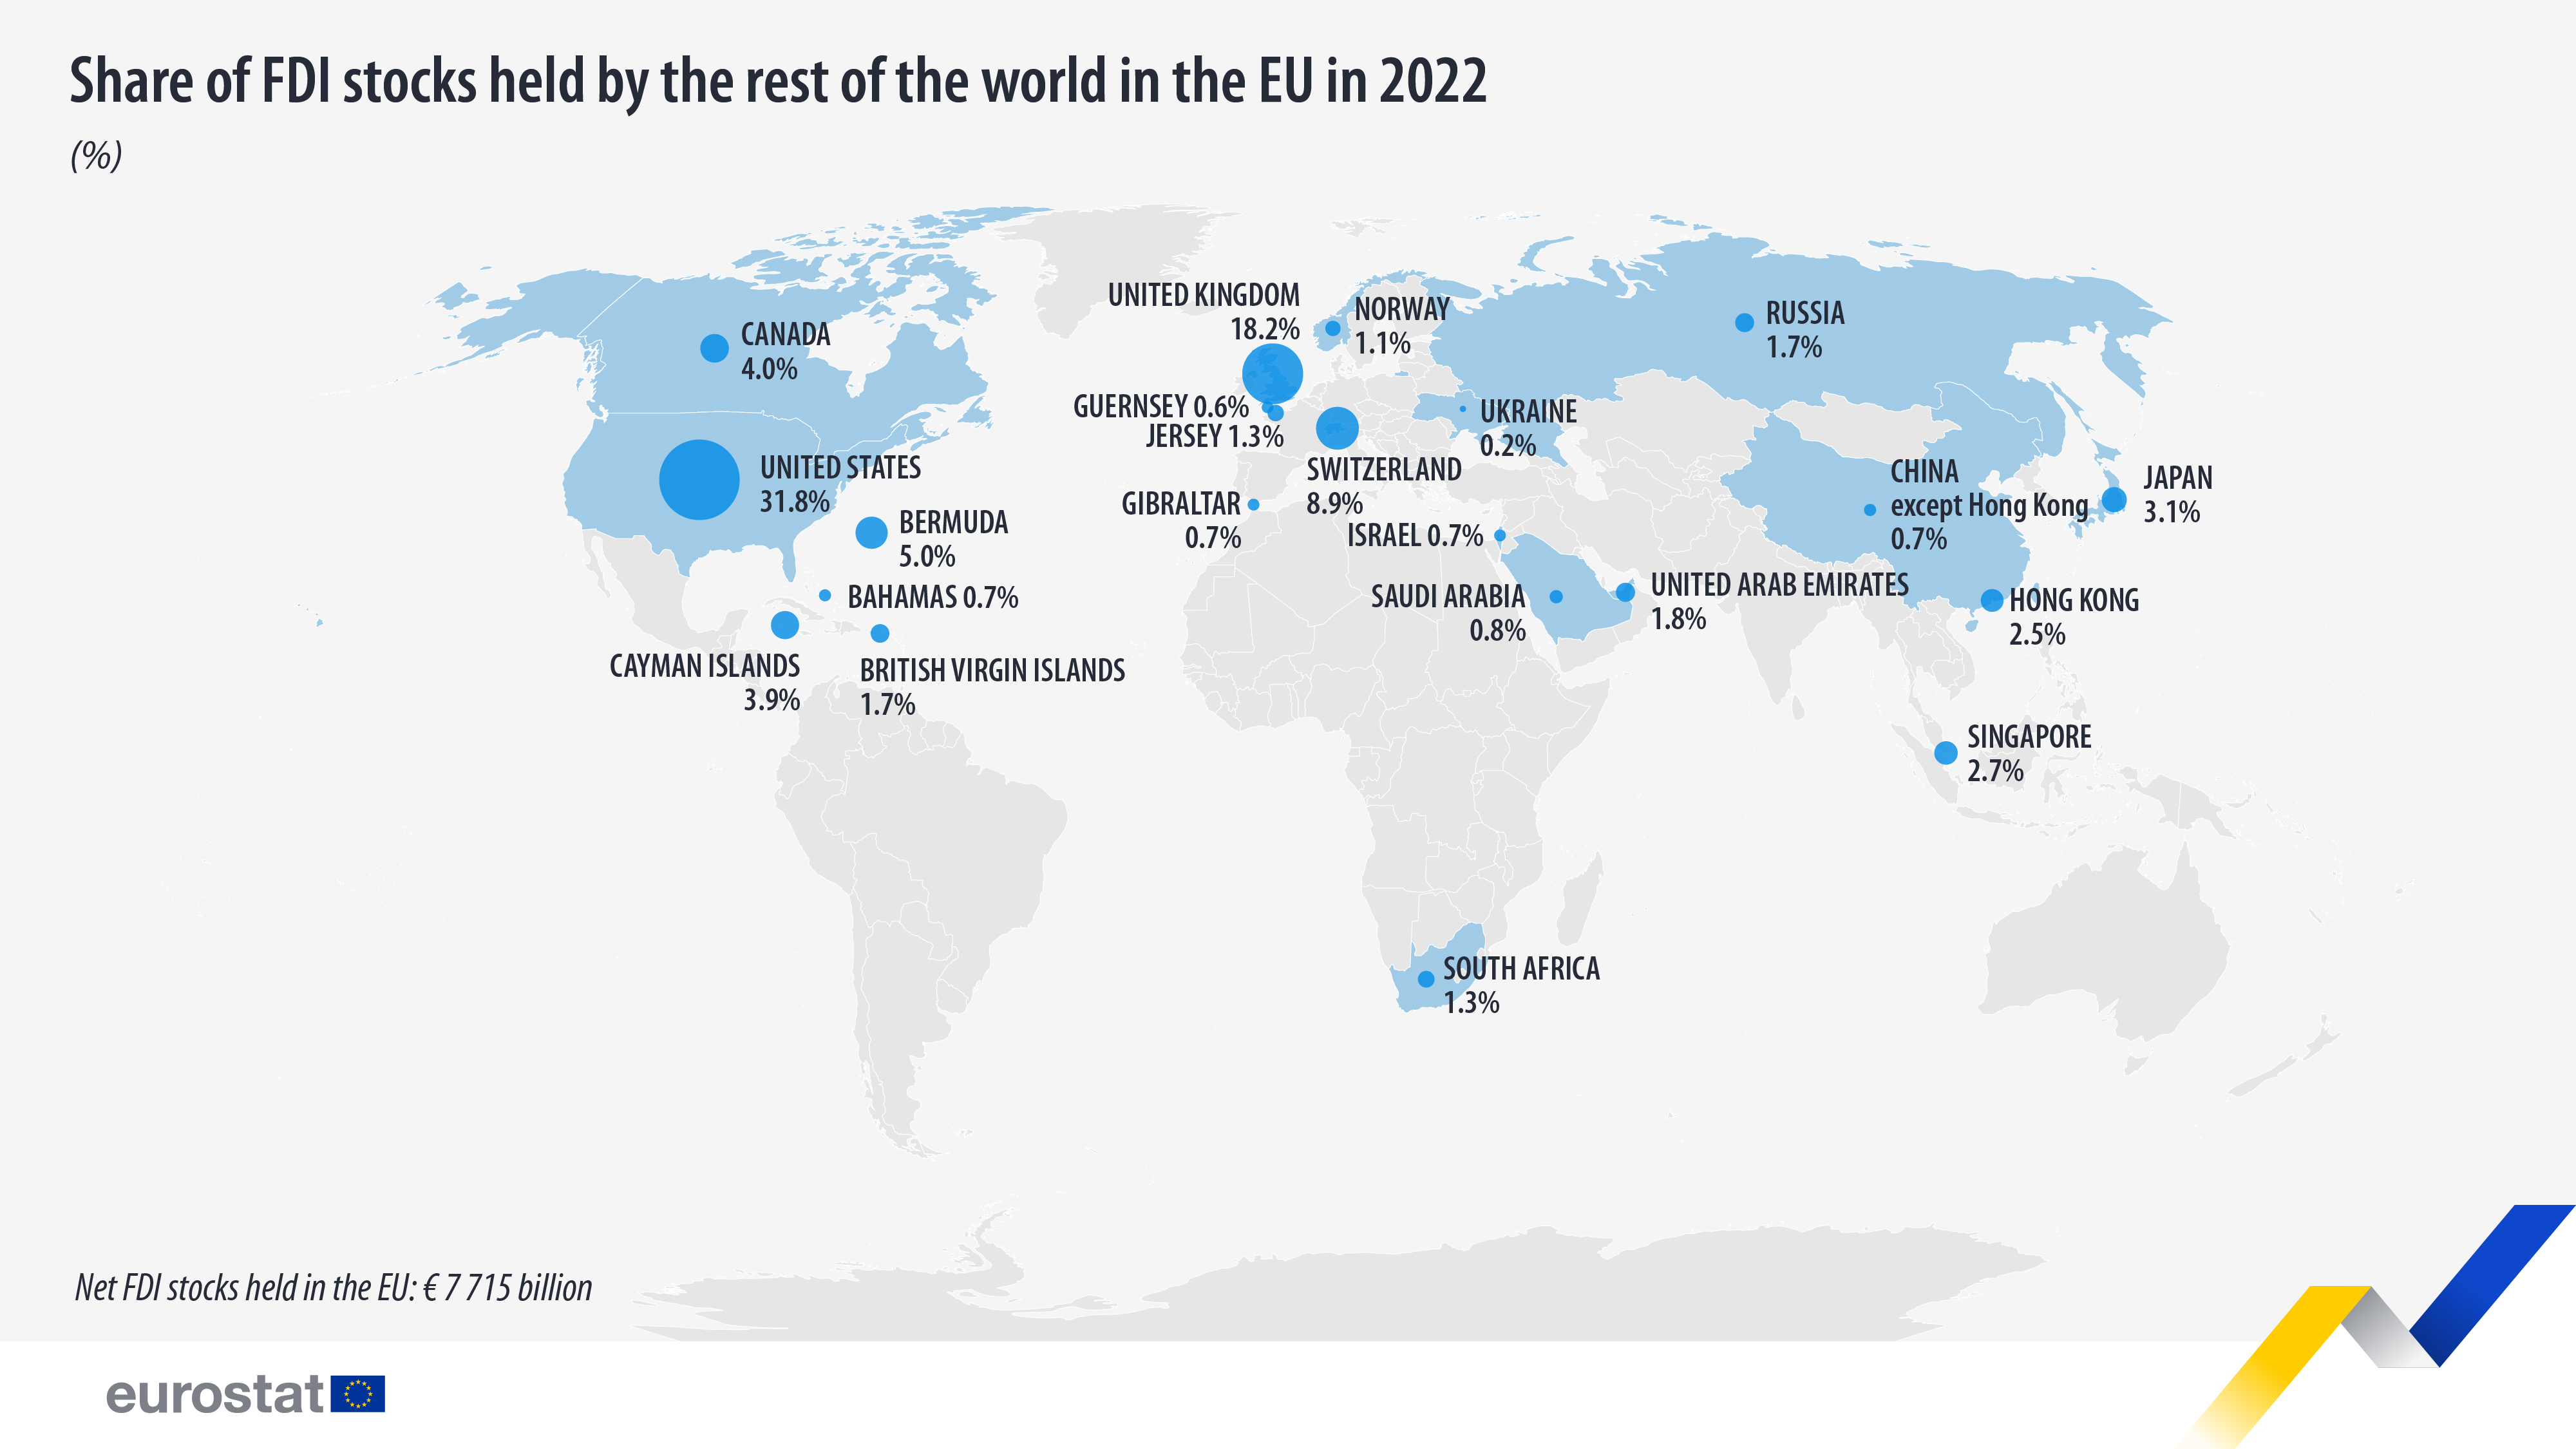 Share of FDI stocks held by the rest of the world in the EU in 2022, %